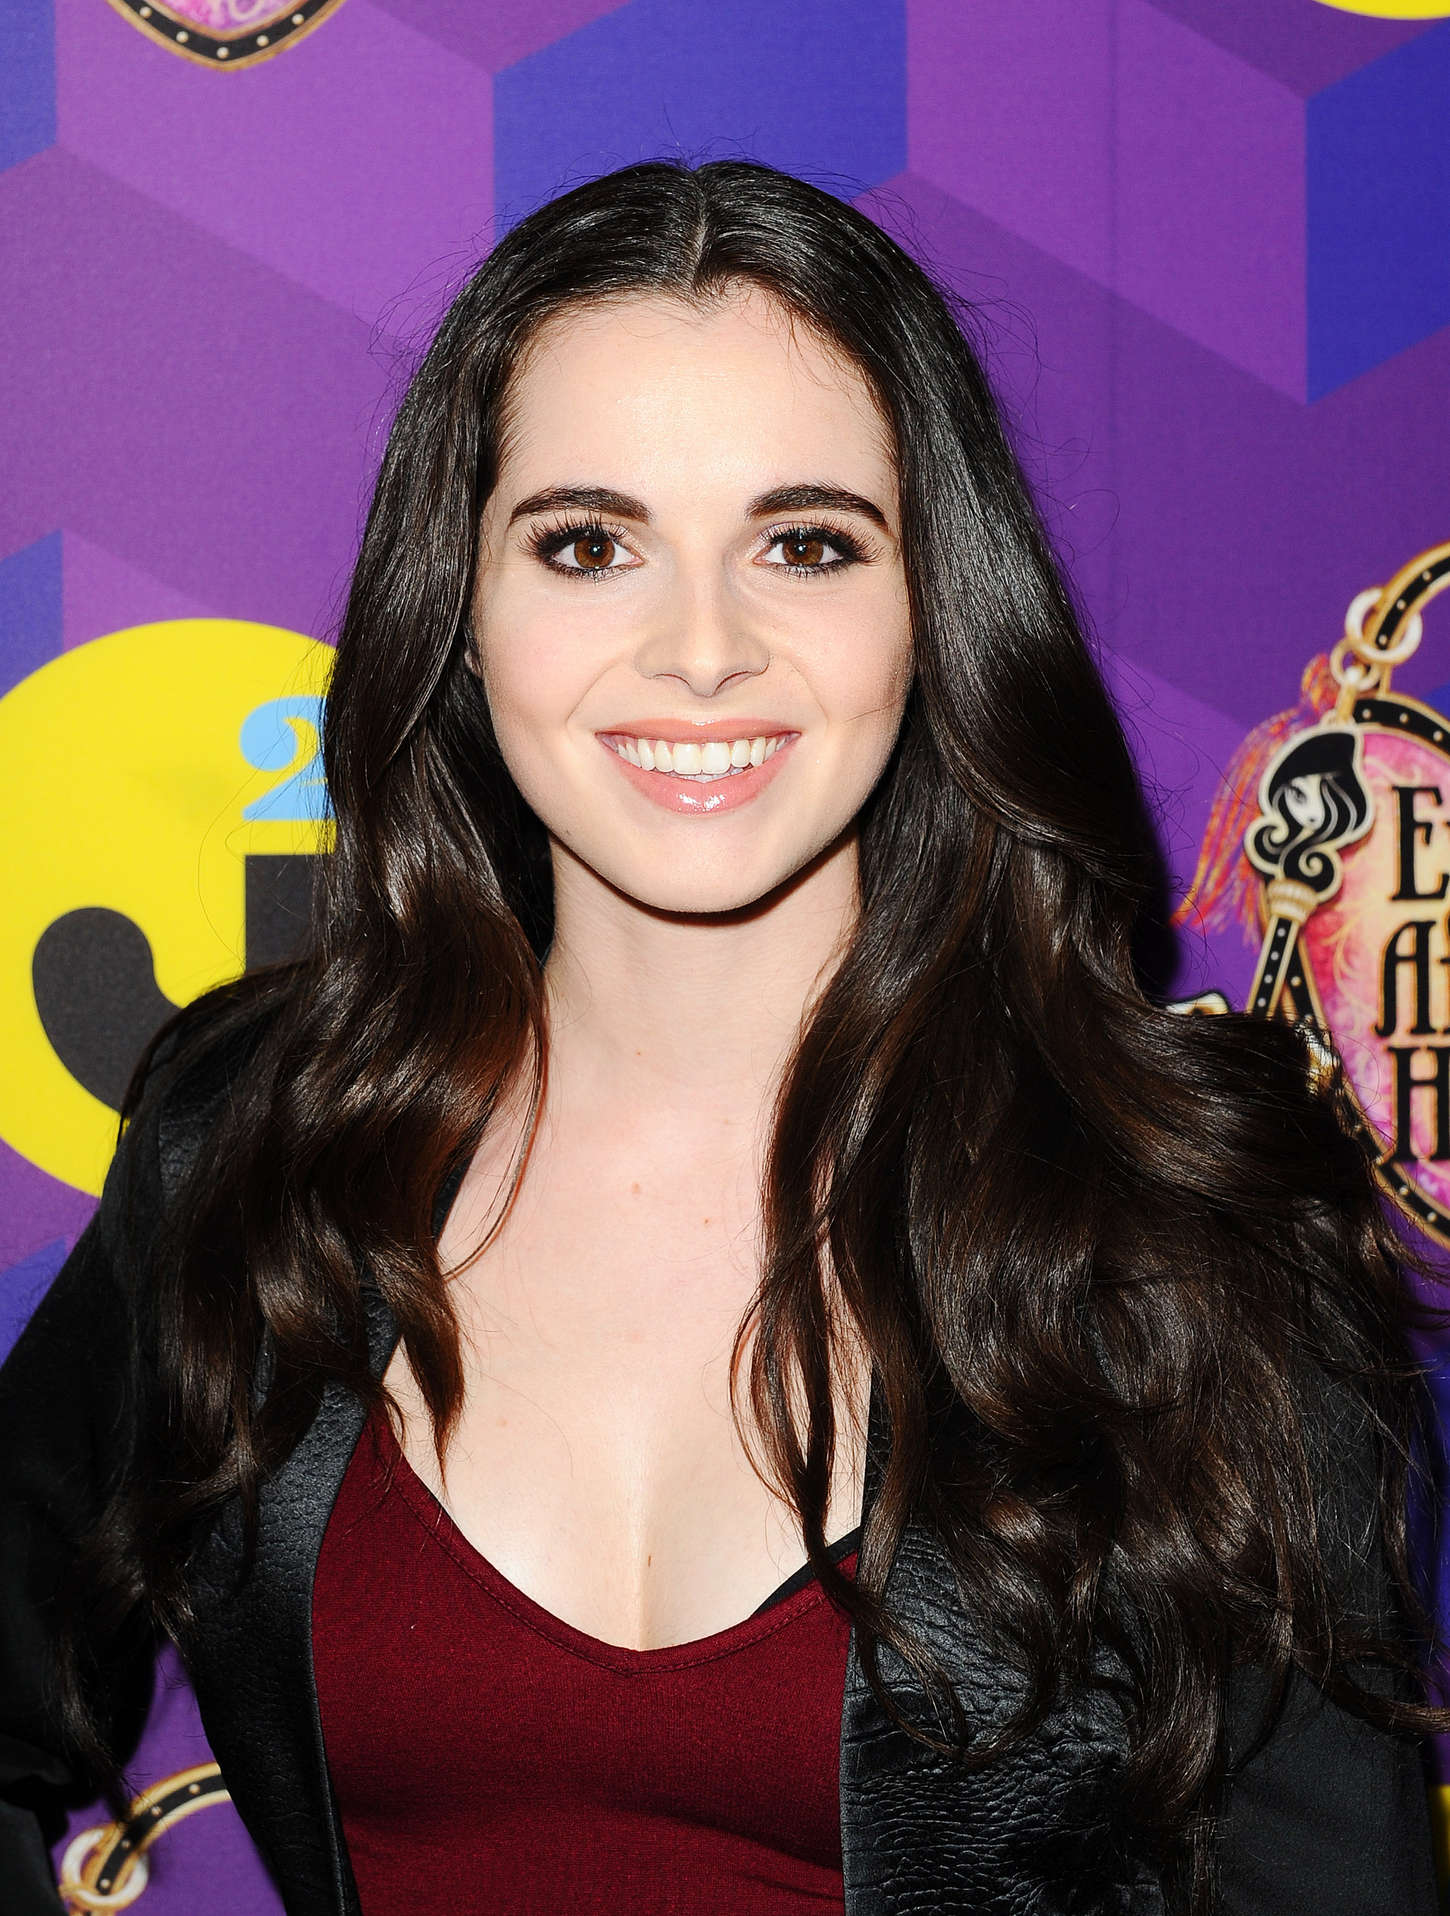 Vanessa Marano - Just Jared’s Way to Wonderland Party in West Hollywood. 